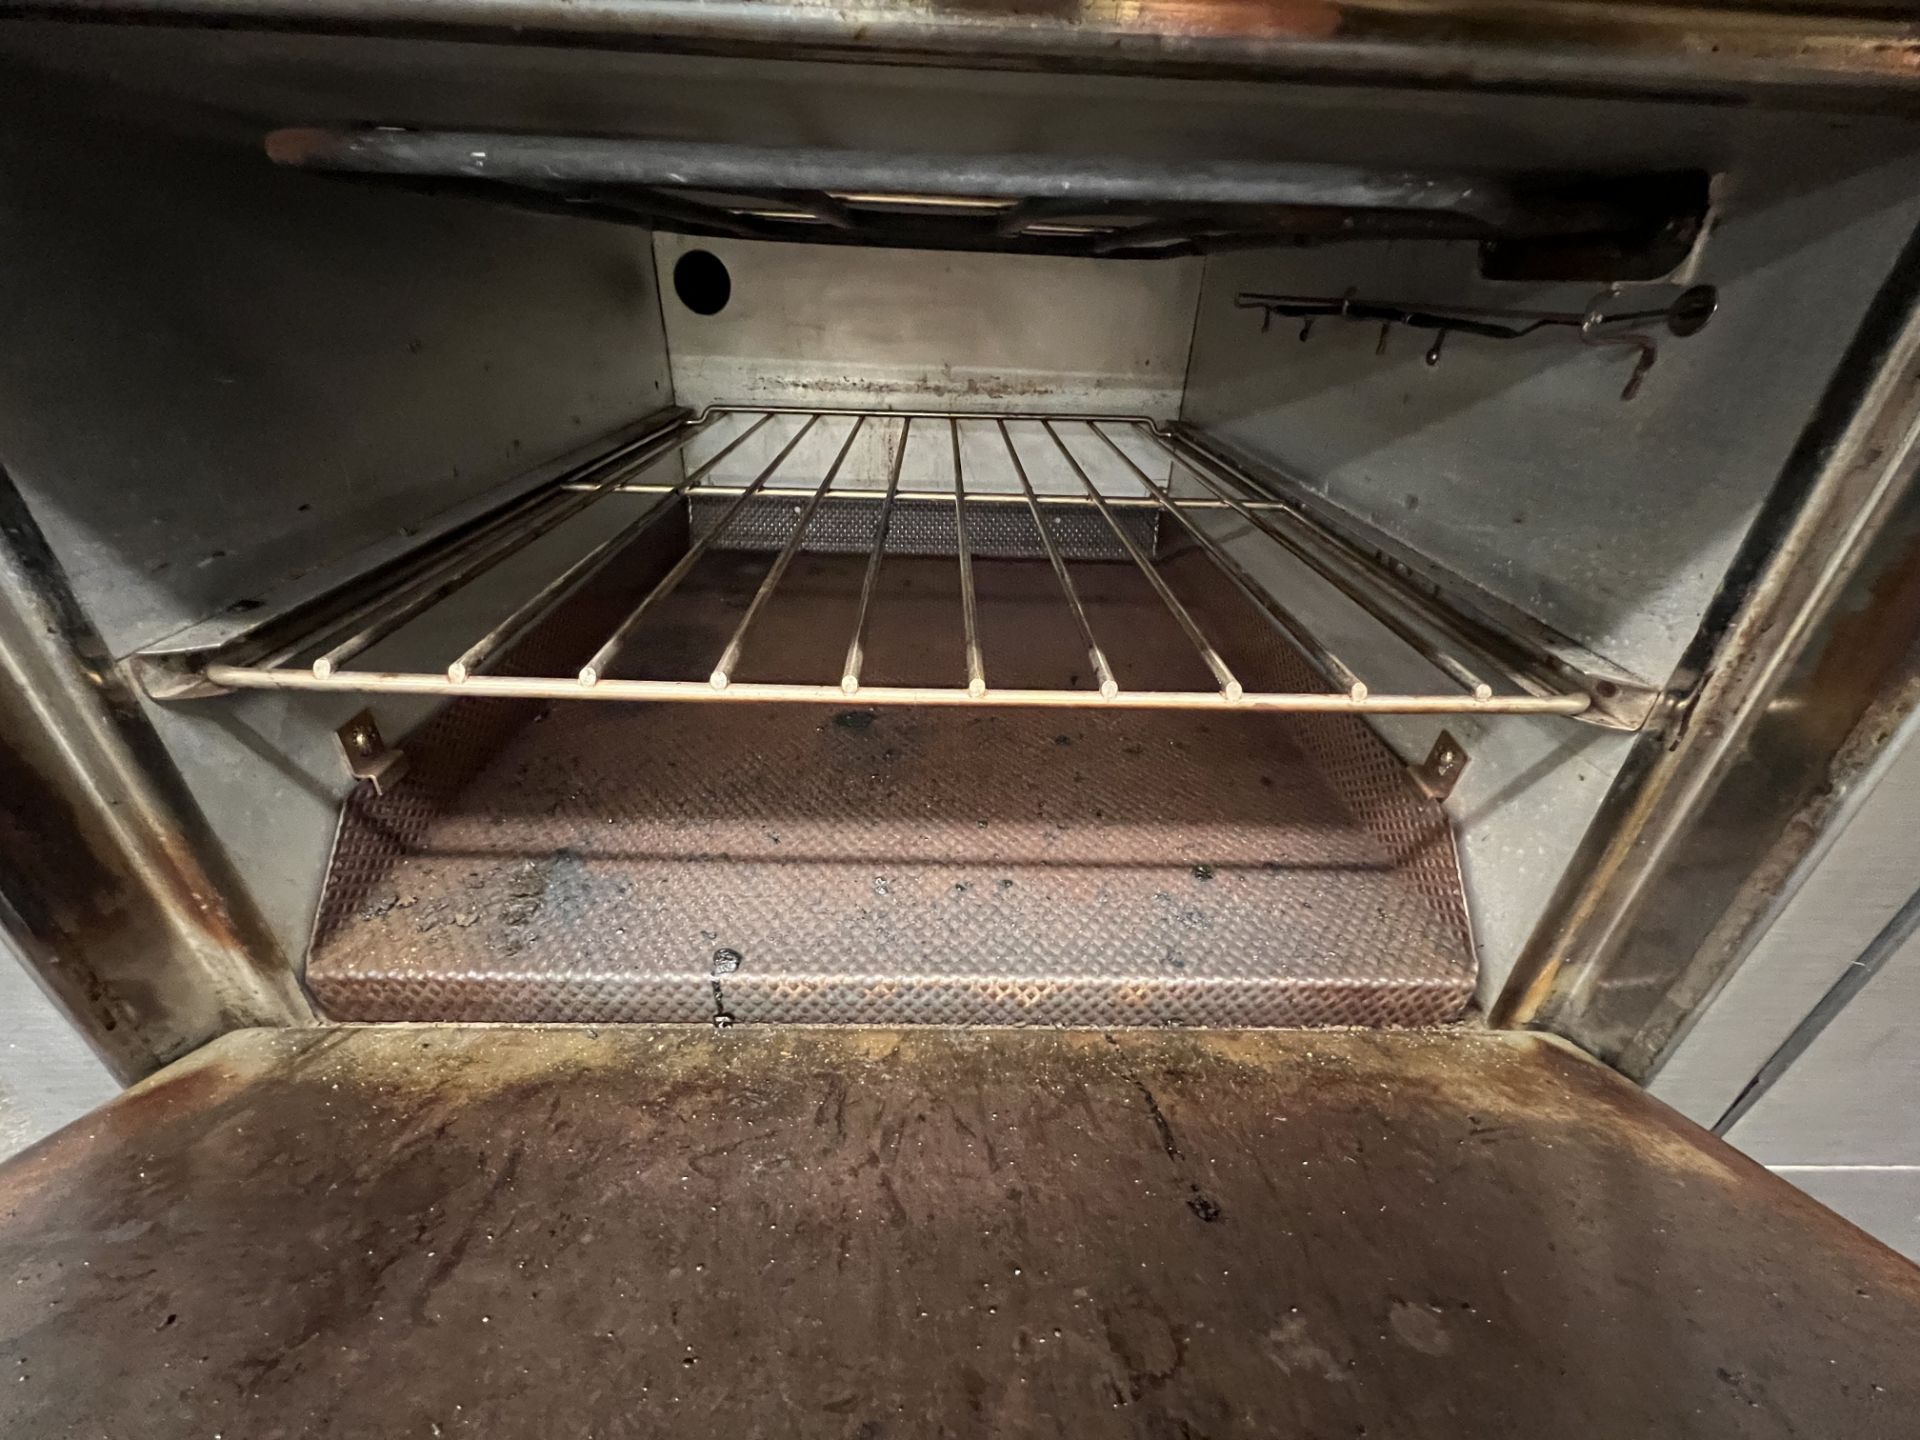 HOBART S/S OVEN, MODEL CN-40, S/N 480N016-C10, APPROX. 24 IN. W X 26 IN. D480, 1 PHASE - Image 5 of 11